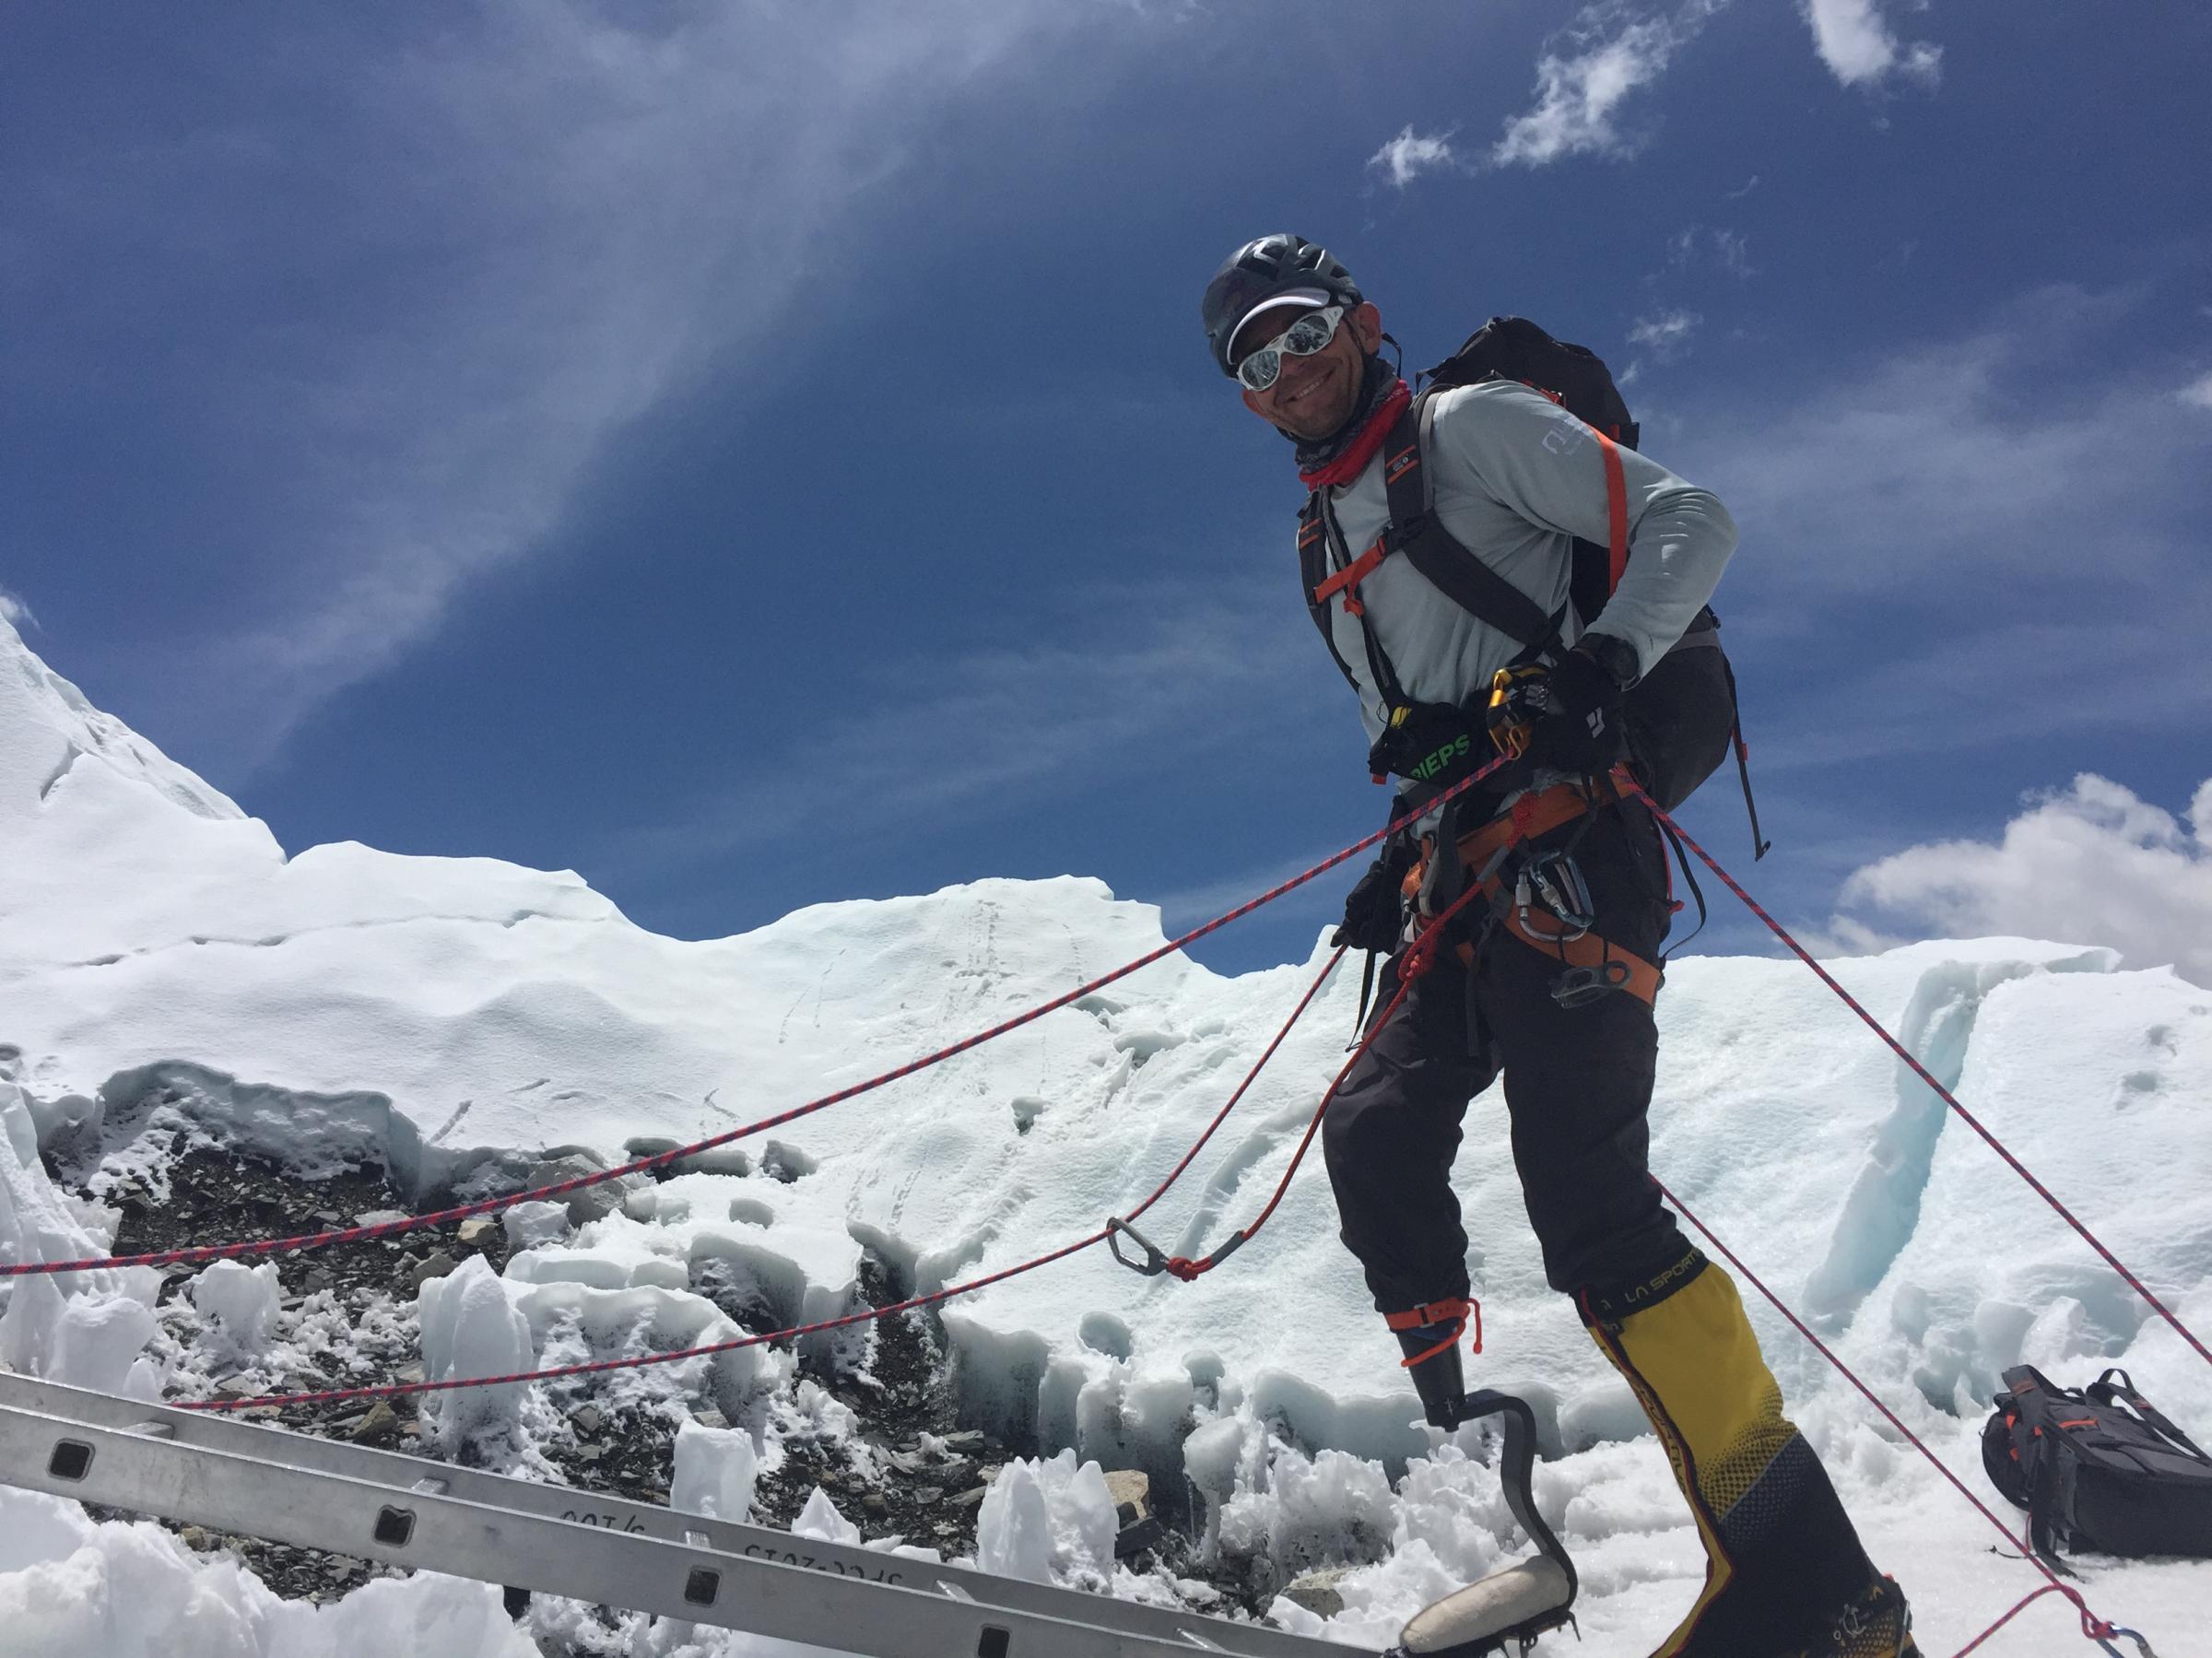 Jeff Glasbrenner is the first American amputee to scale Mount Everest. He accomplished the feat in May 2016.